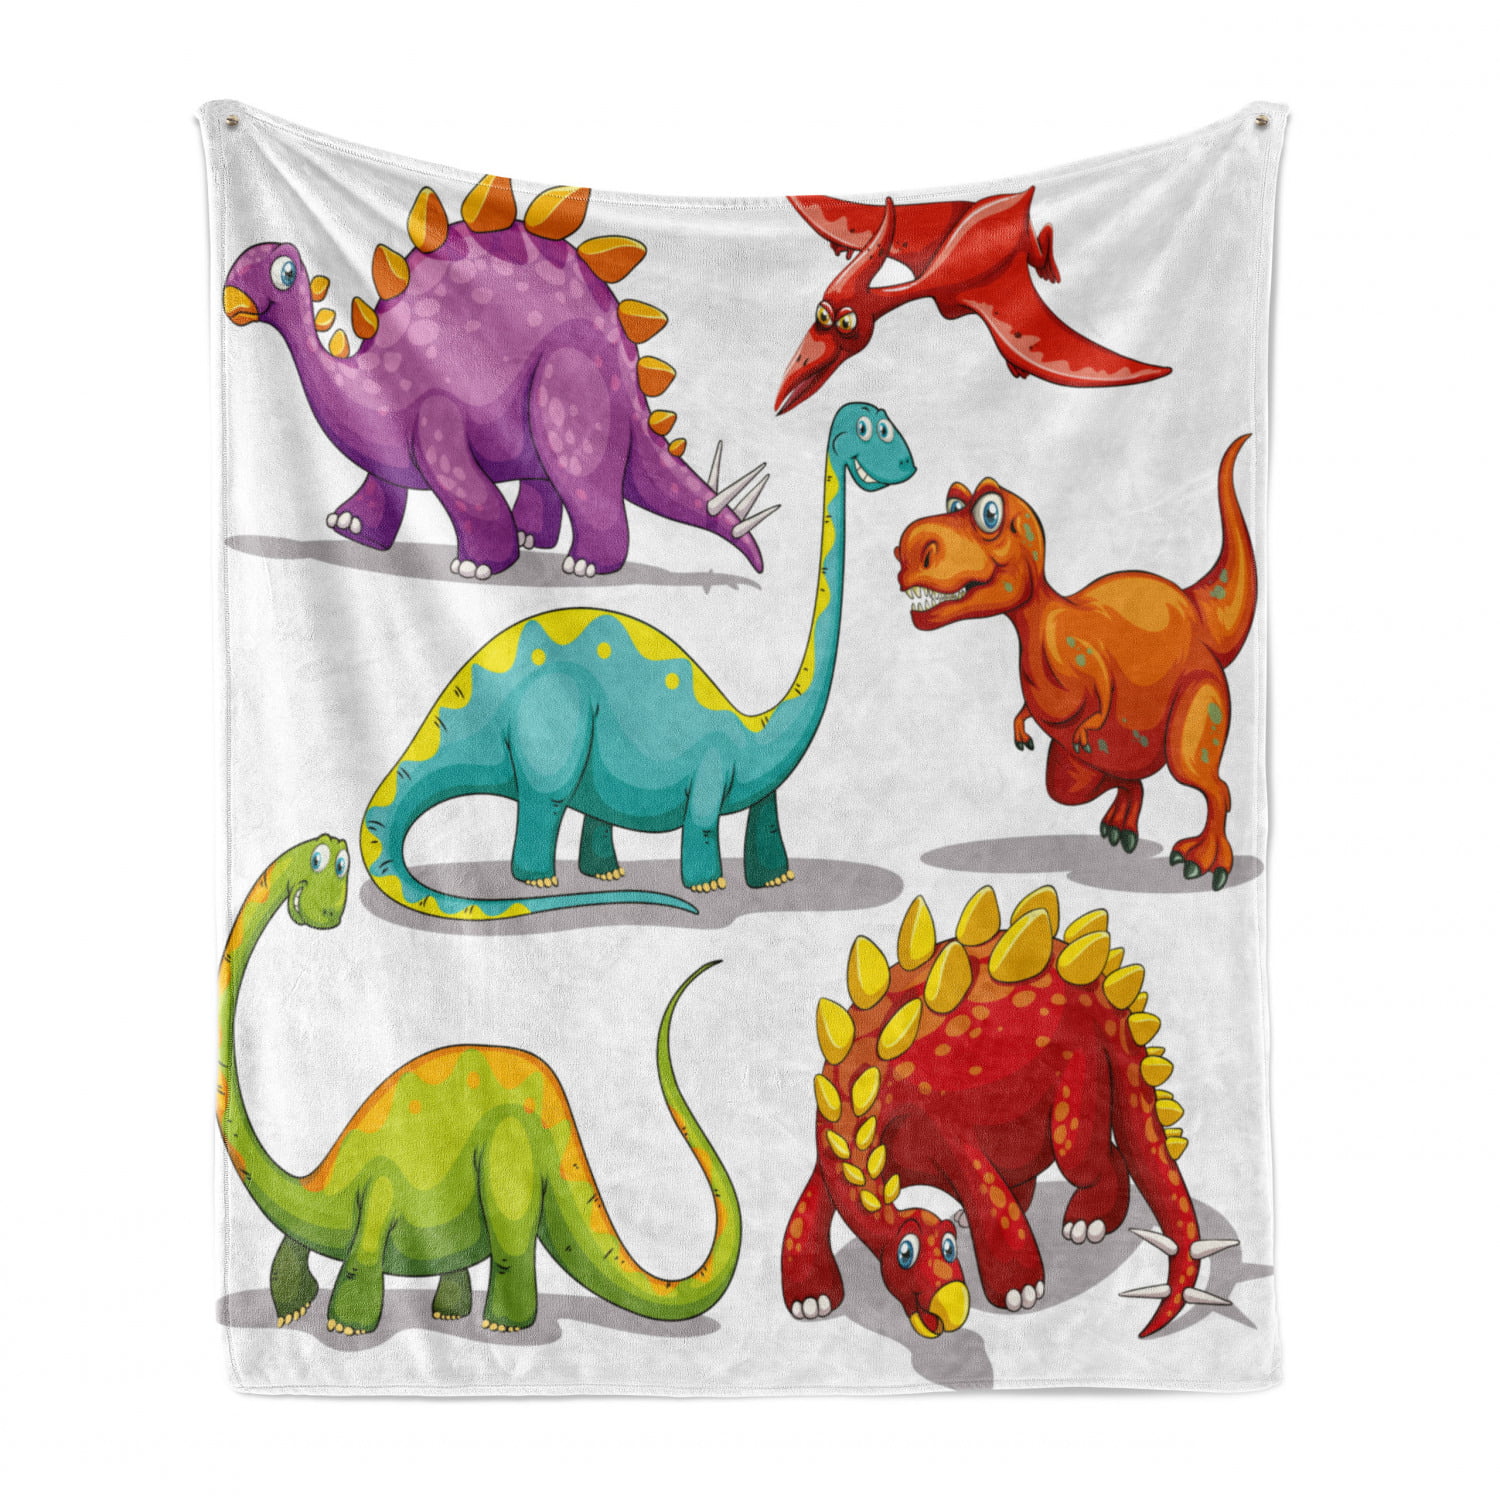 Dinosaur Soft Flannel Fleece Throw Blanket, Colorful Funny Different Dino  Themed Friendly Wildlife Extinct Animals Ice Age, Cozy Plush for Indoor and  Outdoor Use, 60